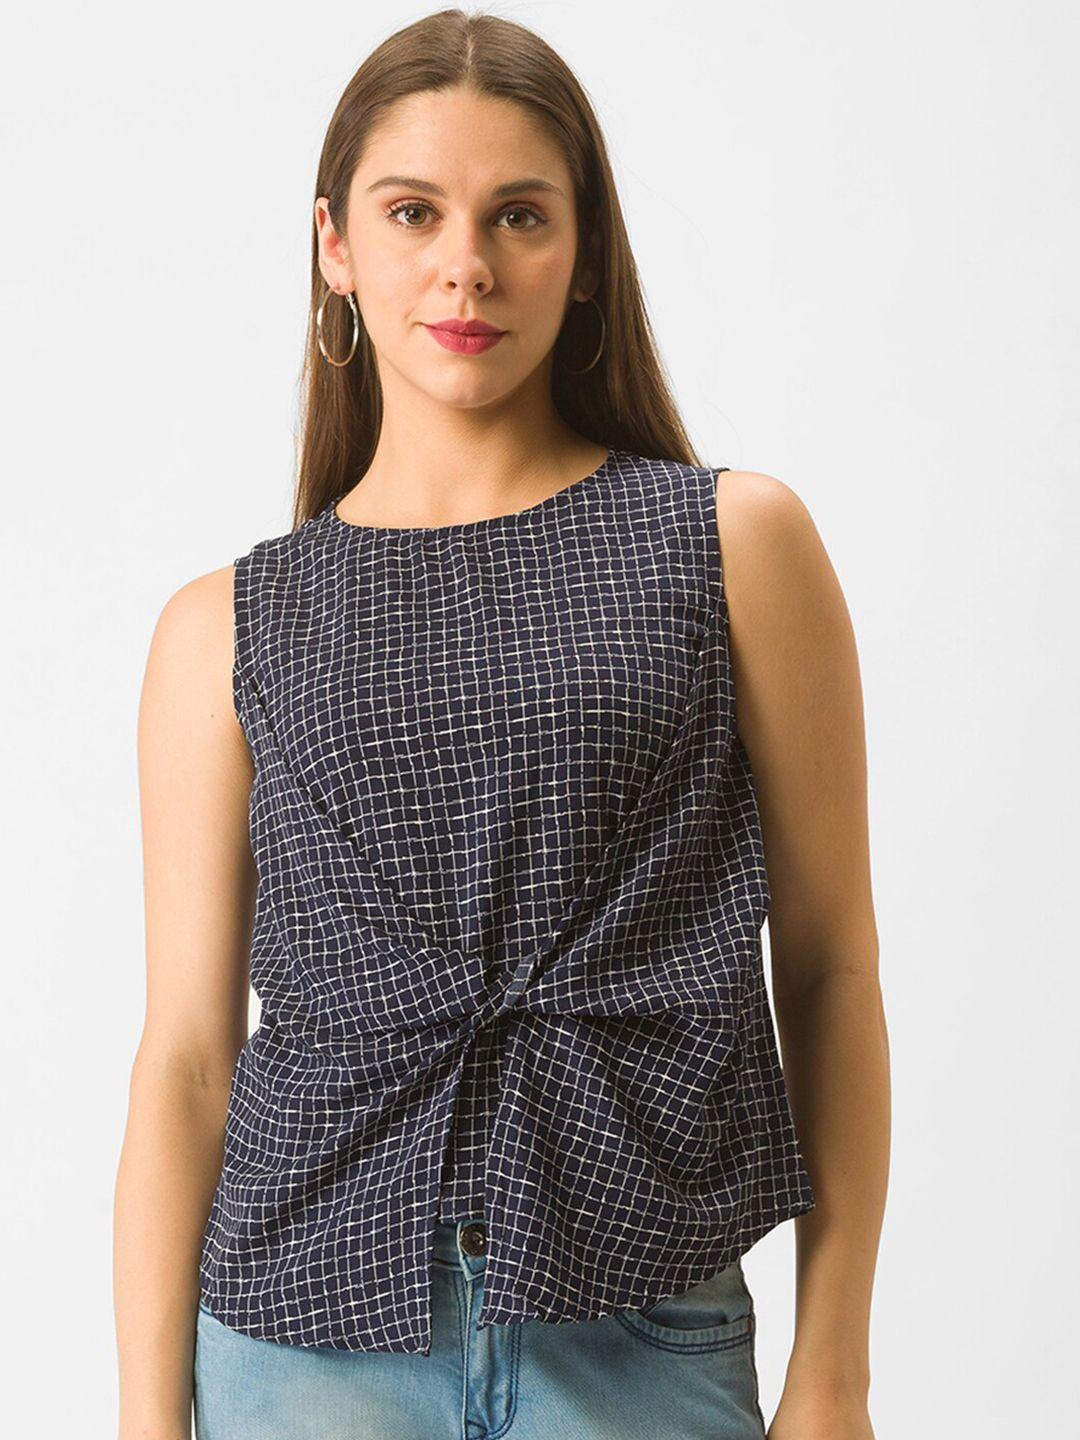 globus-navy-blue-checked-twisted-top